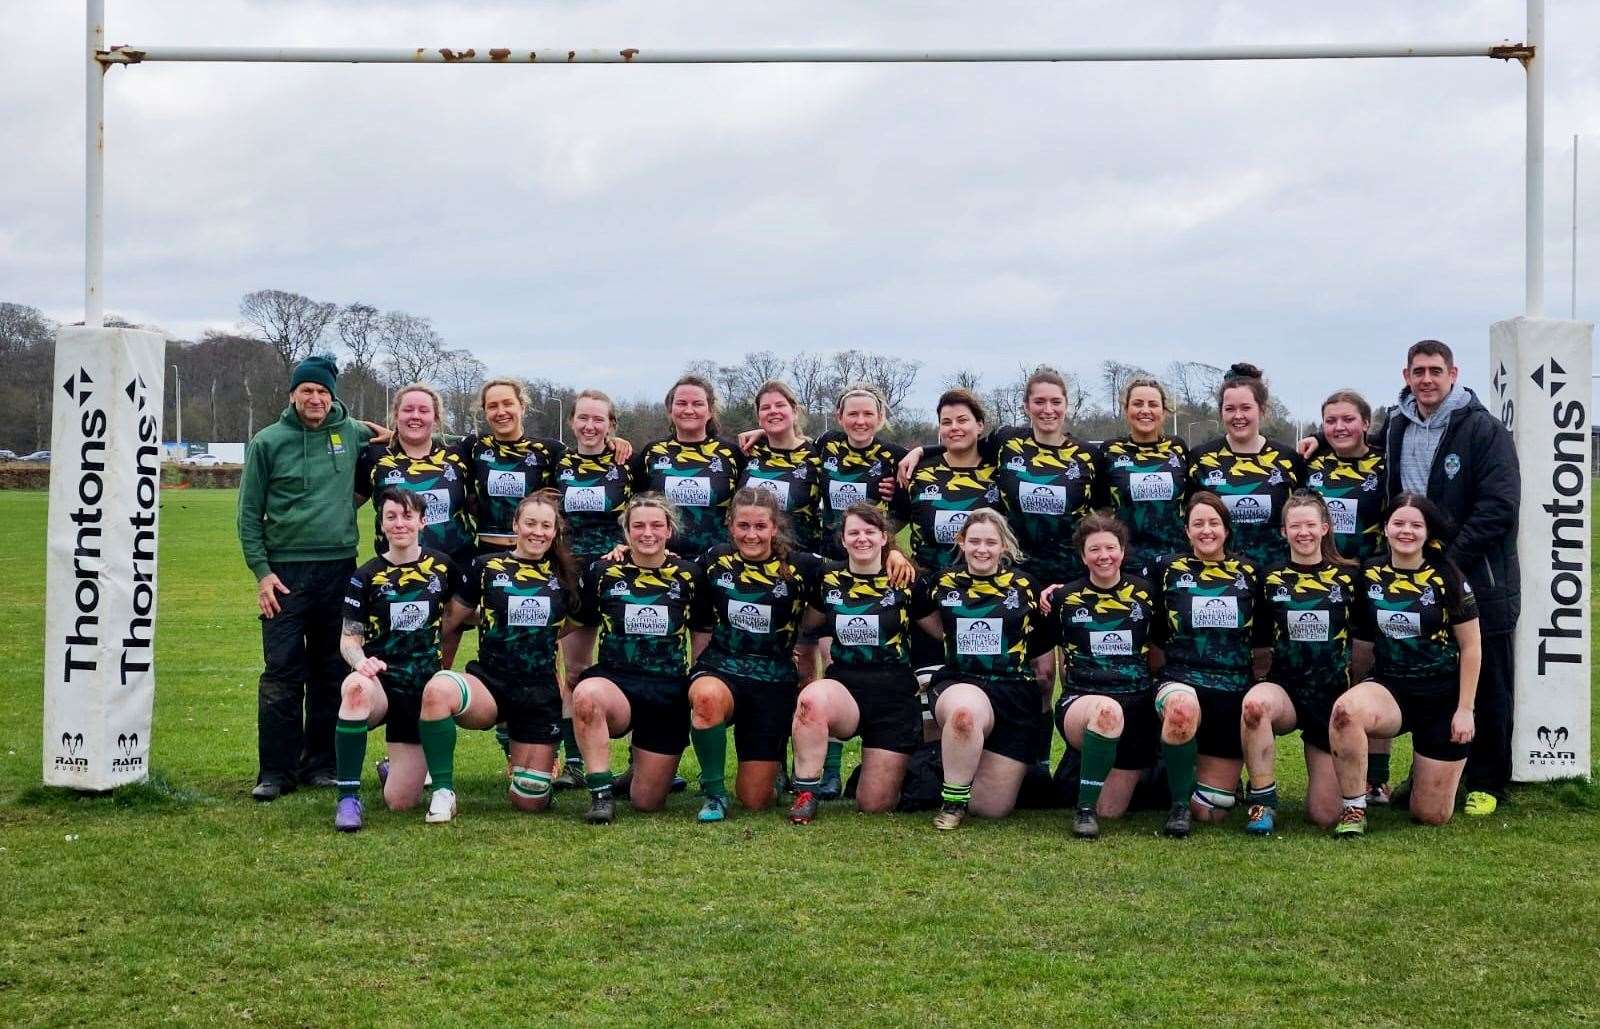 Caithness Krakens are ready to take on Uddingston Selkies in the final of the women’s National Plate at Murrayfield Hive Stadium this weekend.